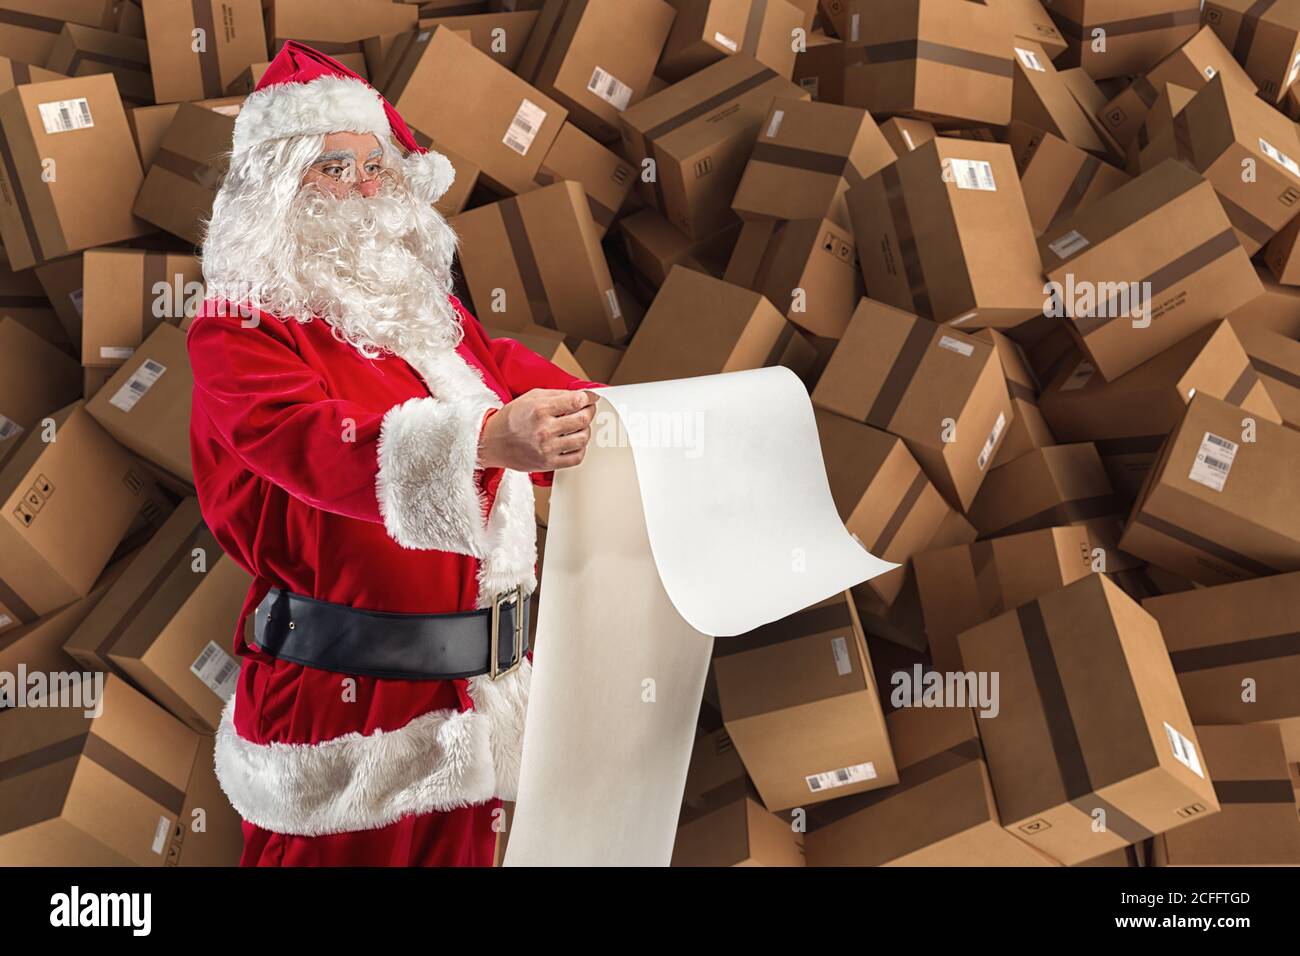 Santa Claus is full of presents request and boxes to delivery Stock Photo